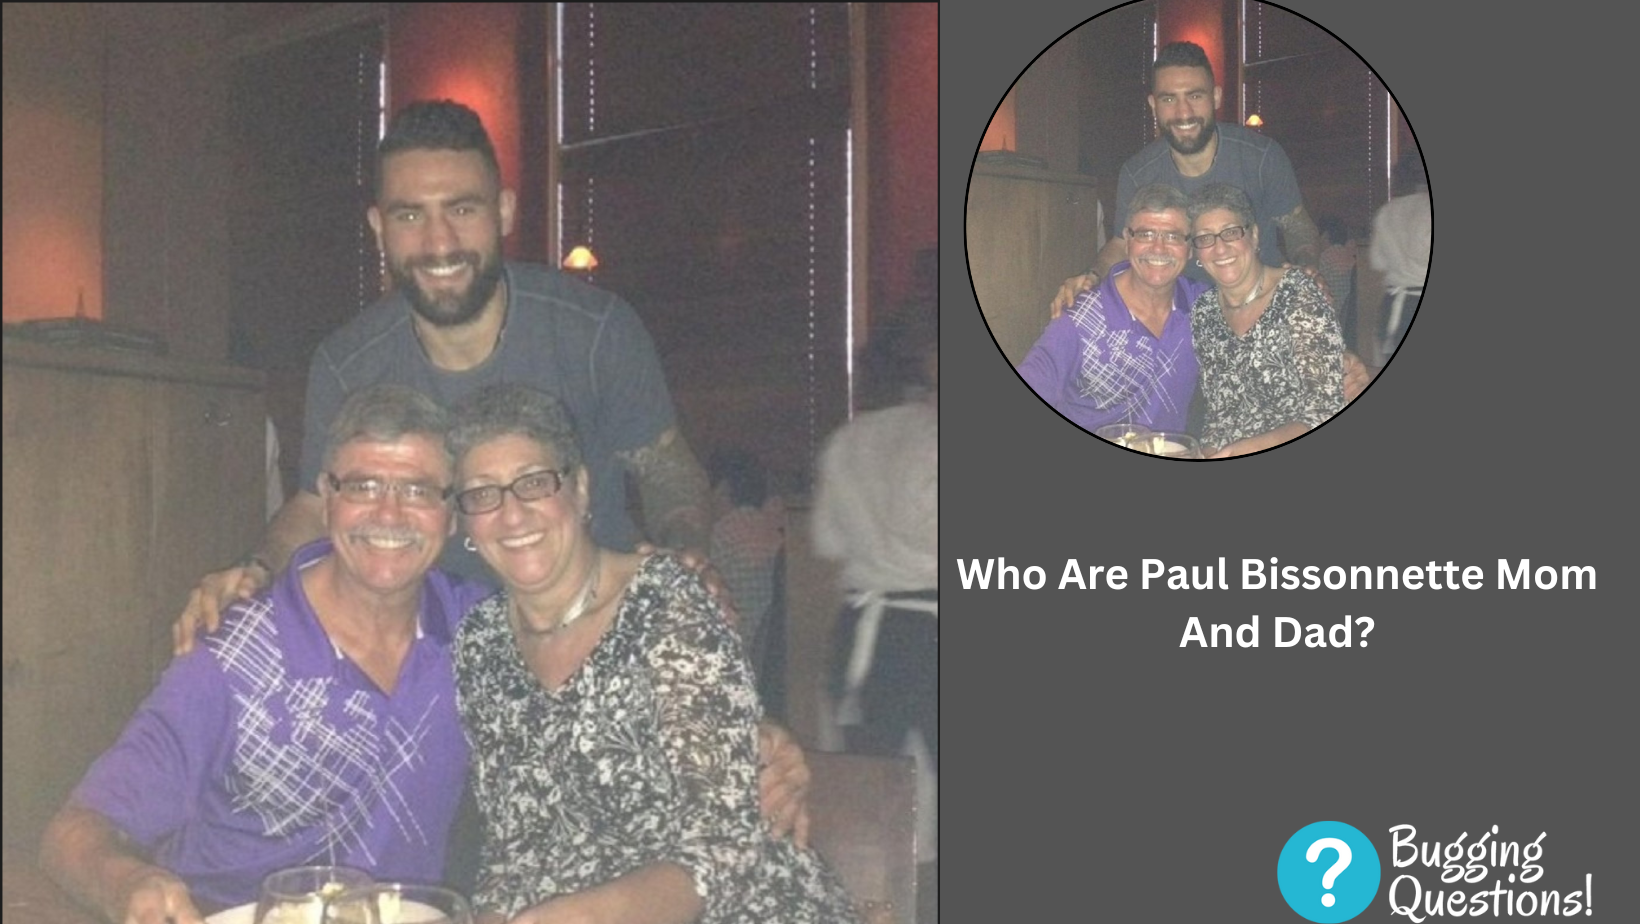 Who Are Paul Bissonnette Mom And Dad?